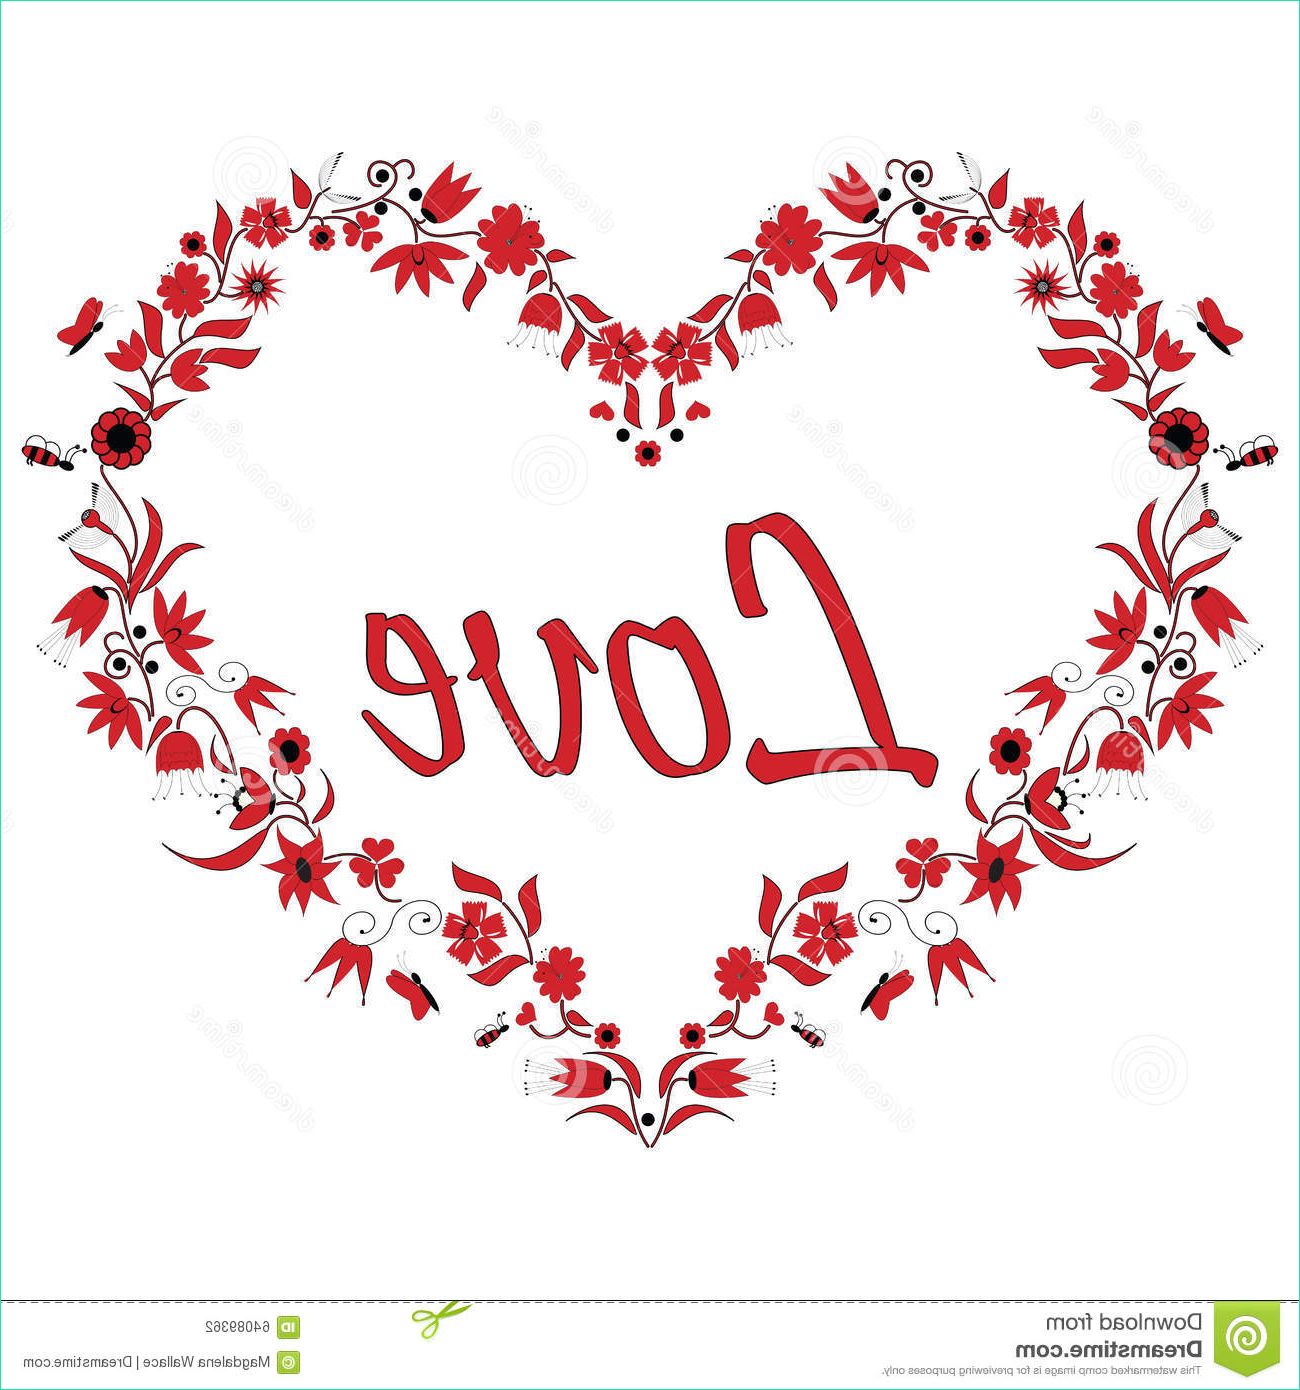 stock illustration valentines love heart shape drawing effect including flowers bees black red image